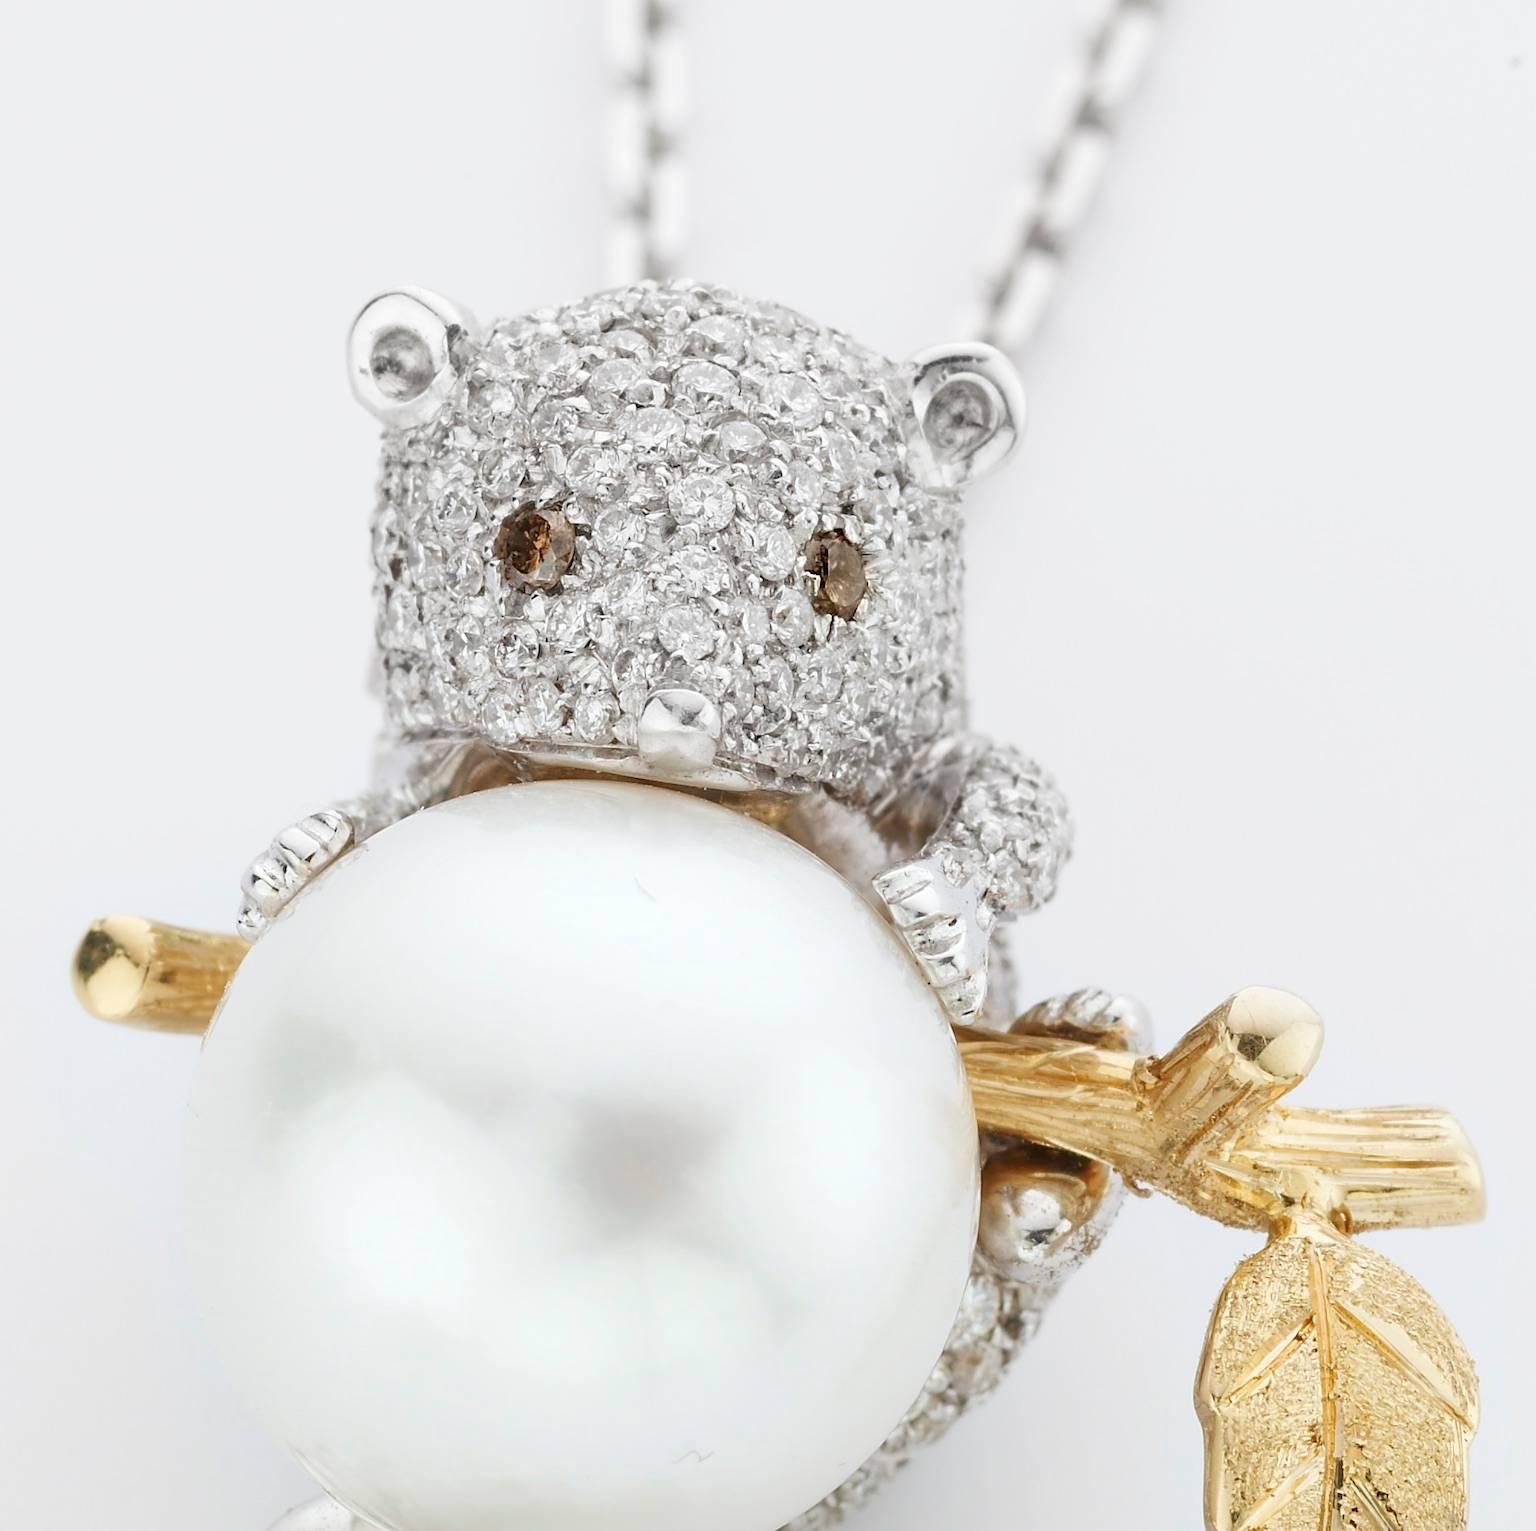 18Kt Gold Animal Stoat White Diamond SouthSea Pearl Pendant Necklace Made in Italy
This is a very beautiful pendant inspired by nature. It is a white gold stoat covered with diamonds on a yellow gold handmade engraved branch holding a spherical